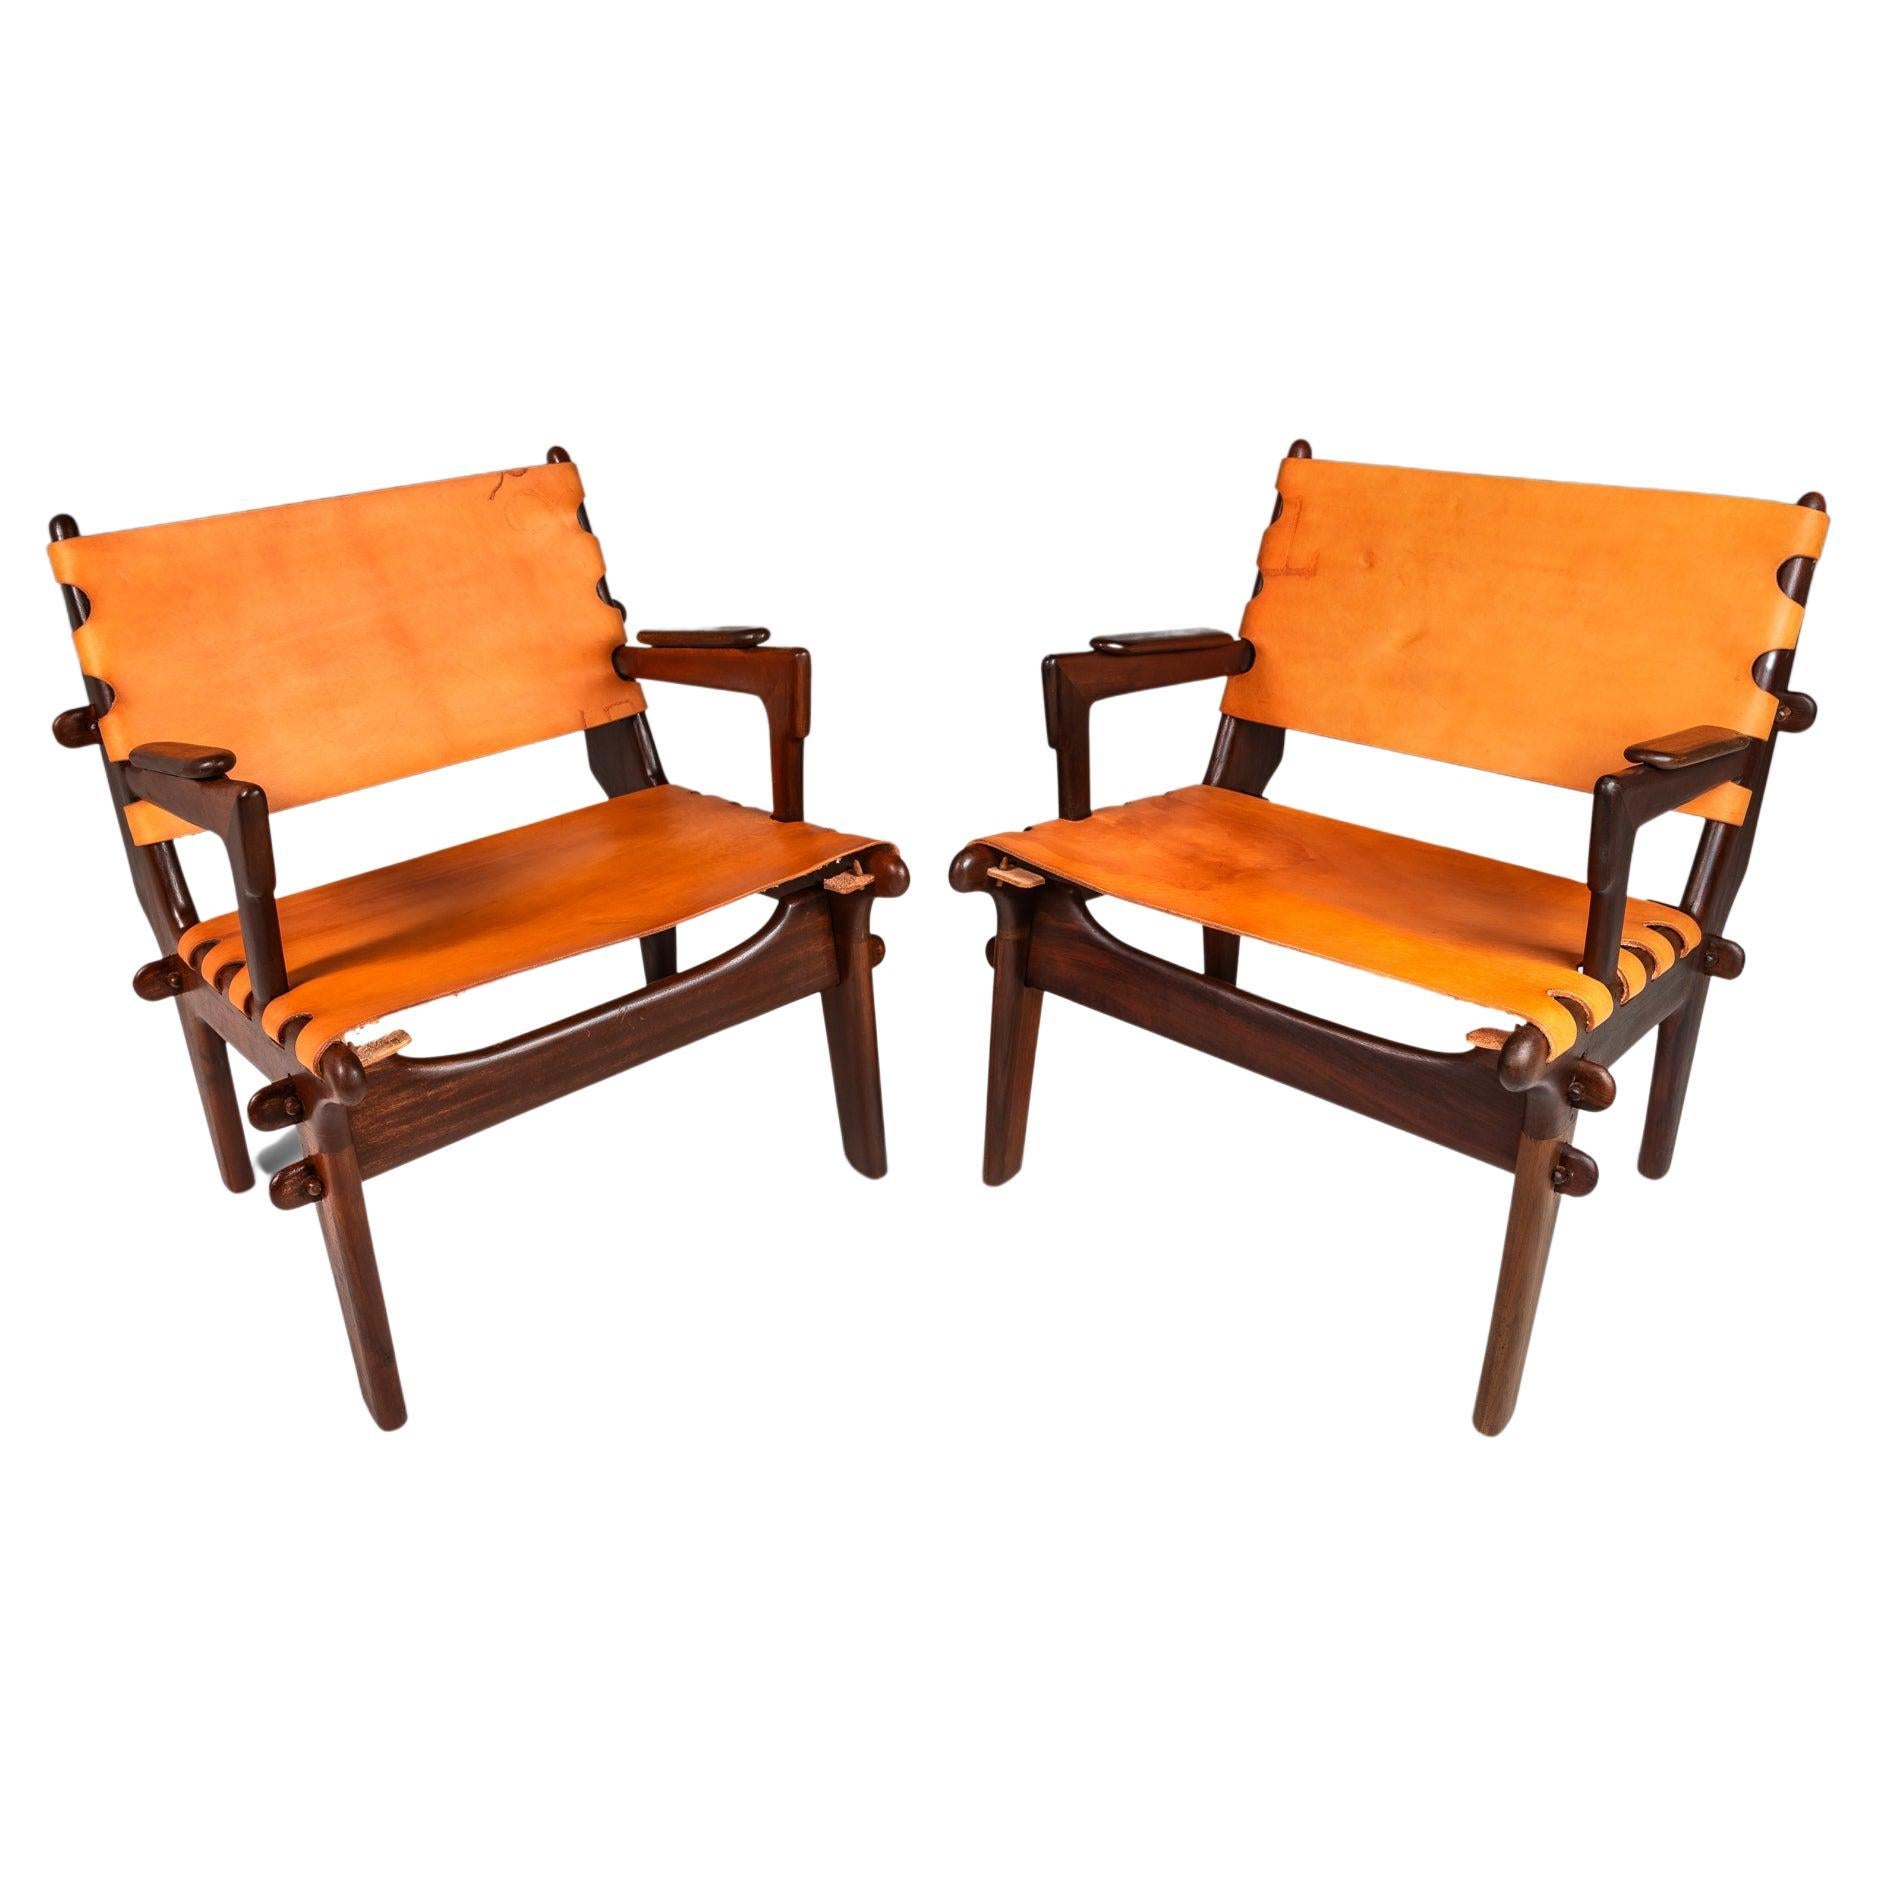 Set of 2 Tooled Leather Sling Lounge Chairs by Angel Pazmino, Ecuador, c. 1960's